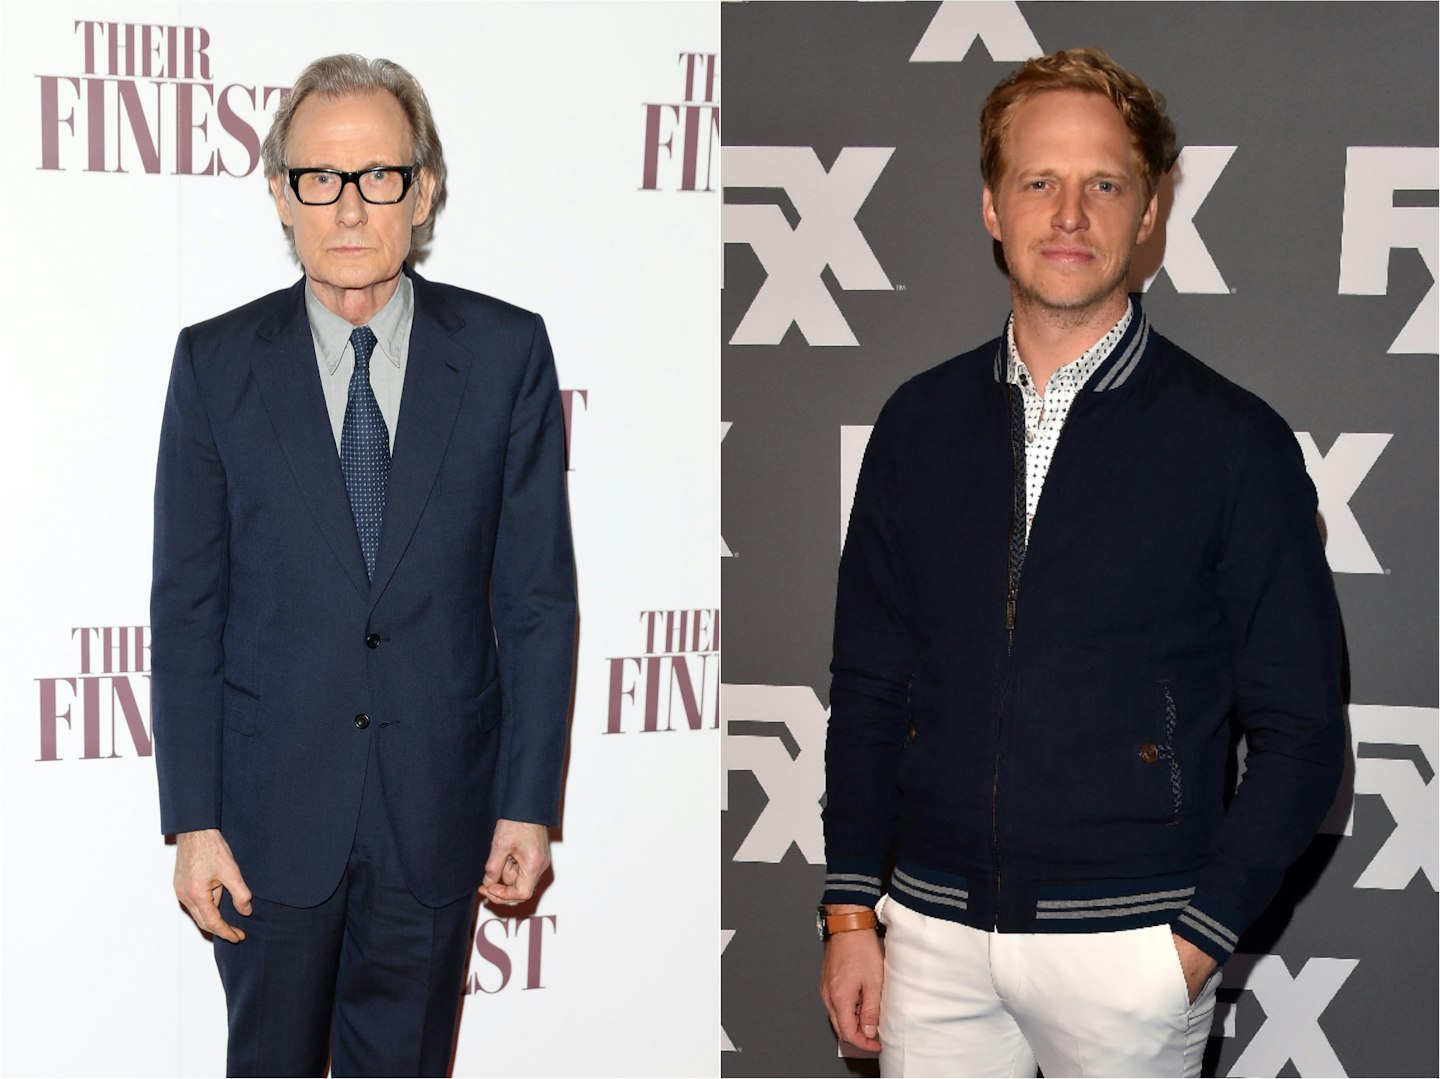 Bill Nighy and Chris Geere